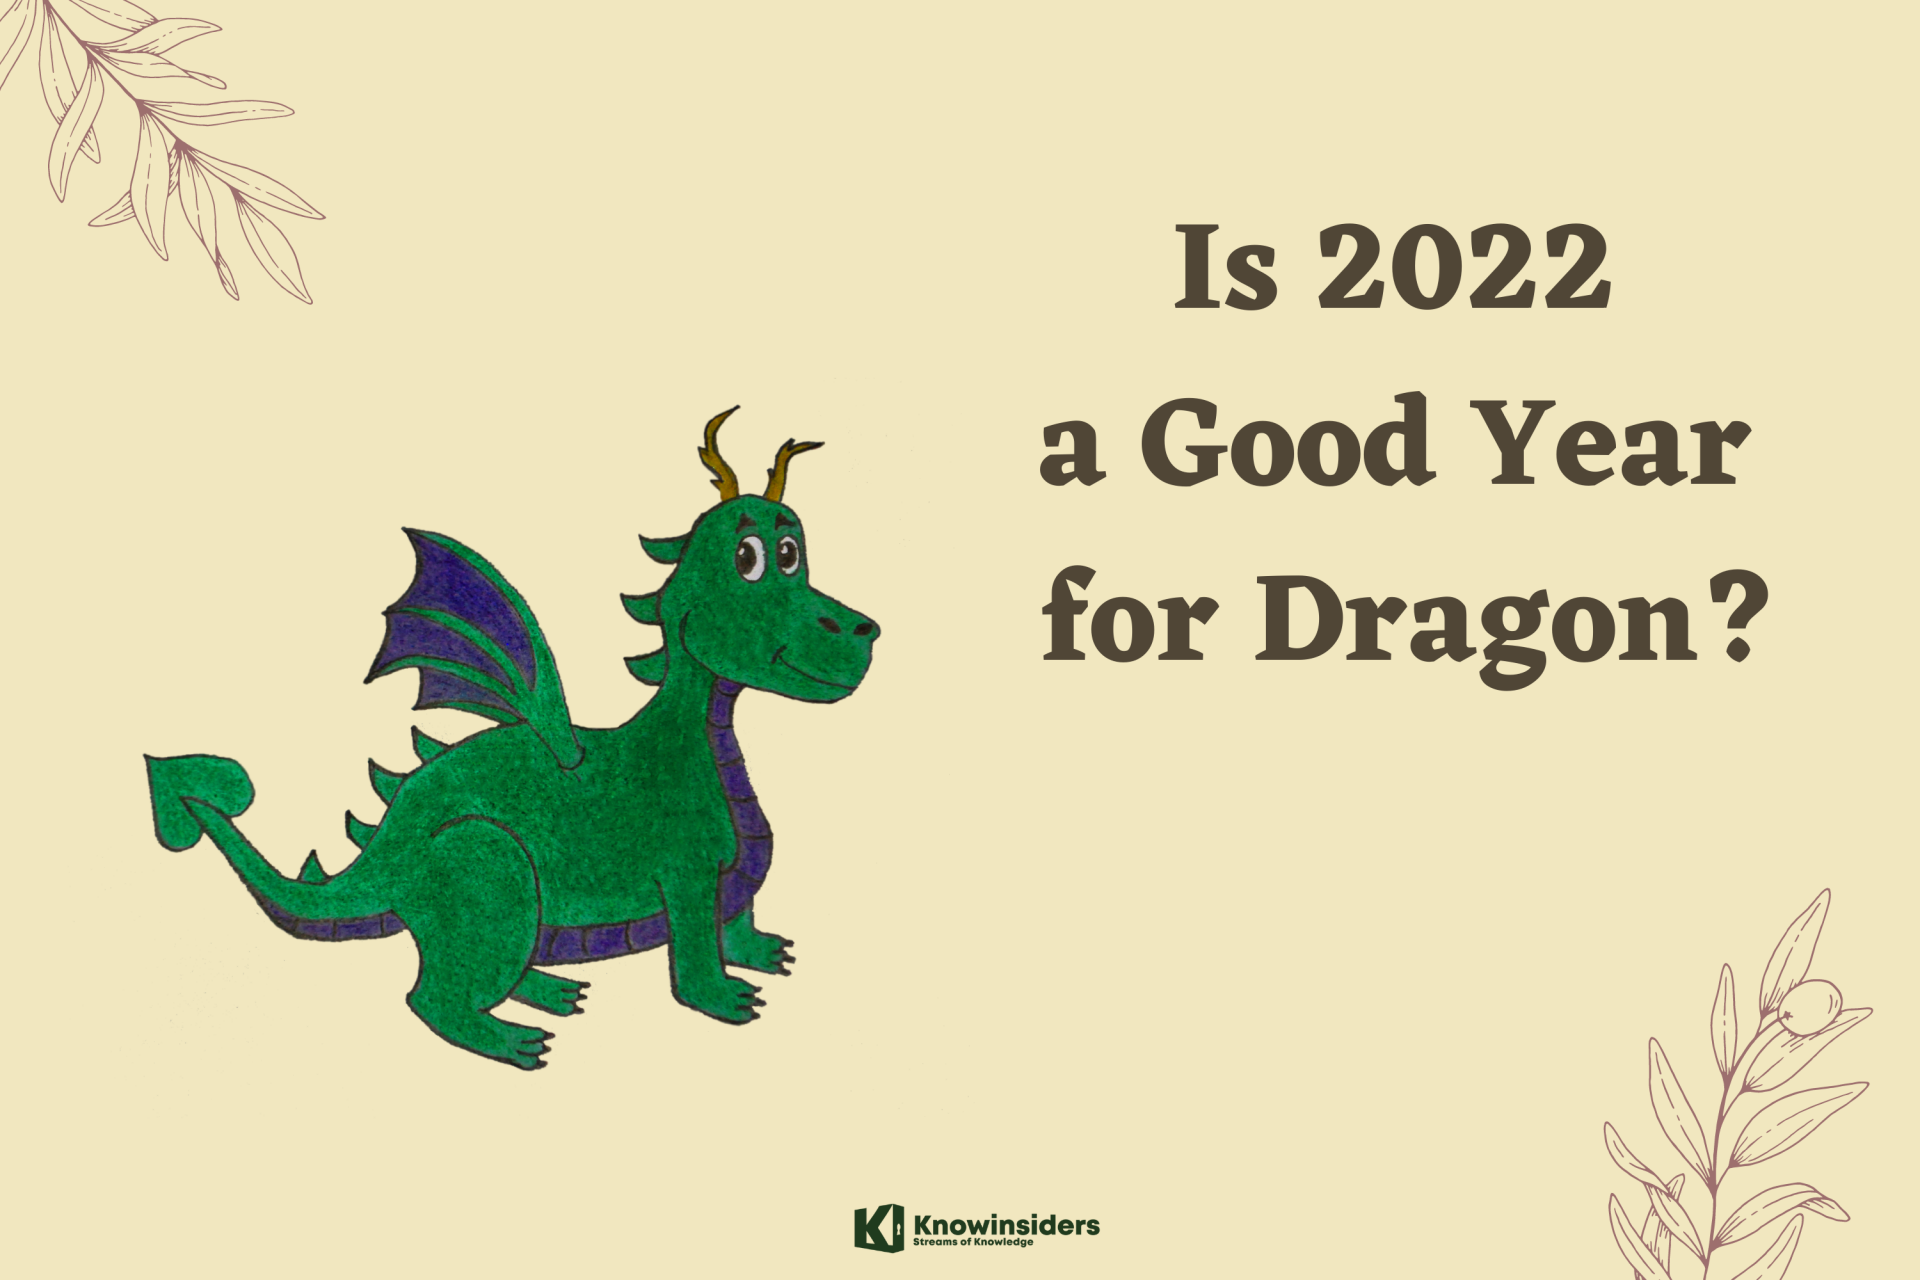 Is 2022 A Good Year for Dragon?